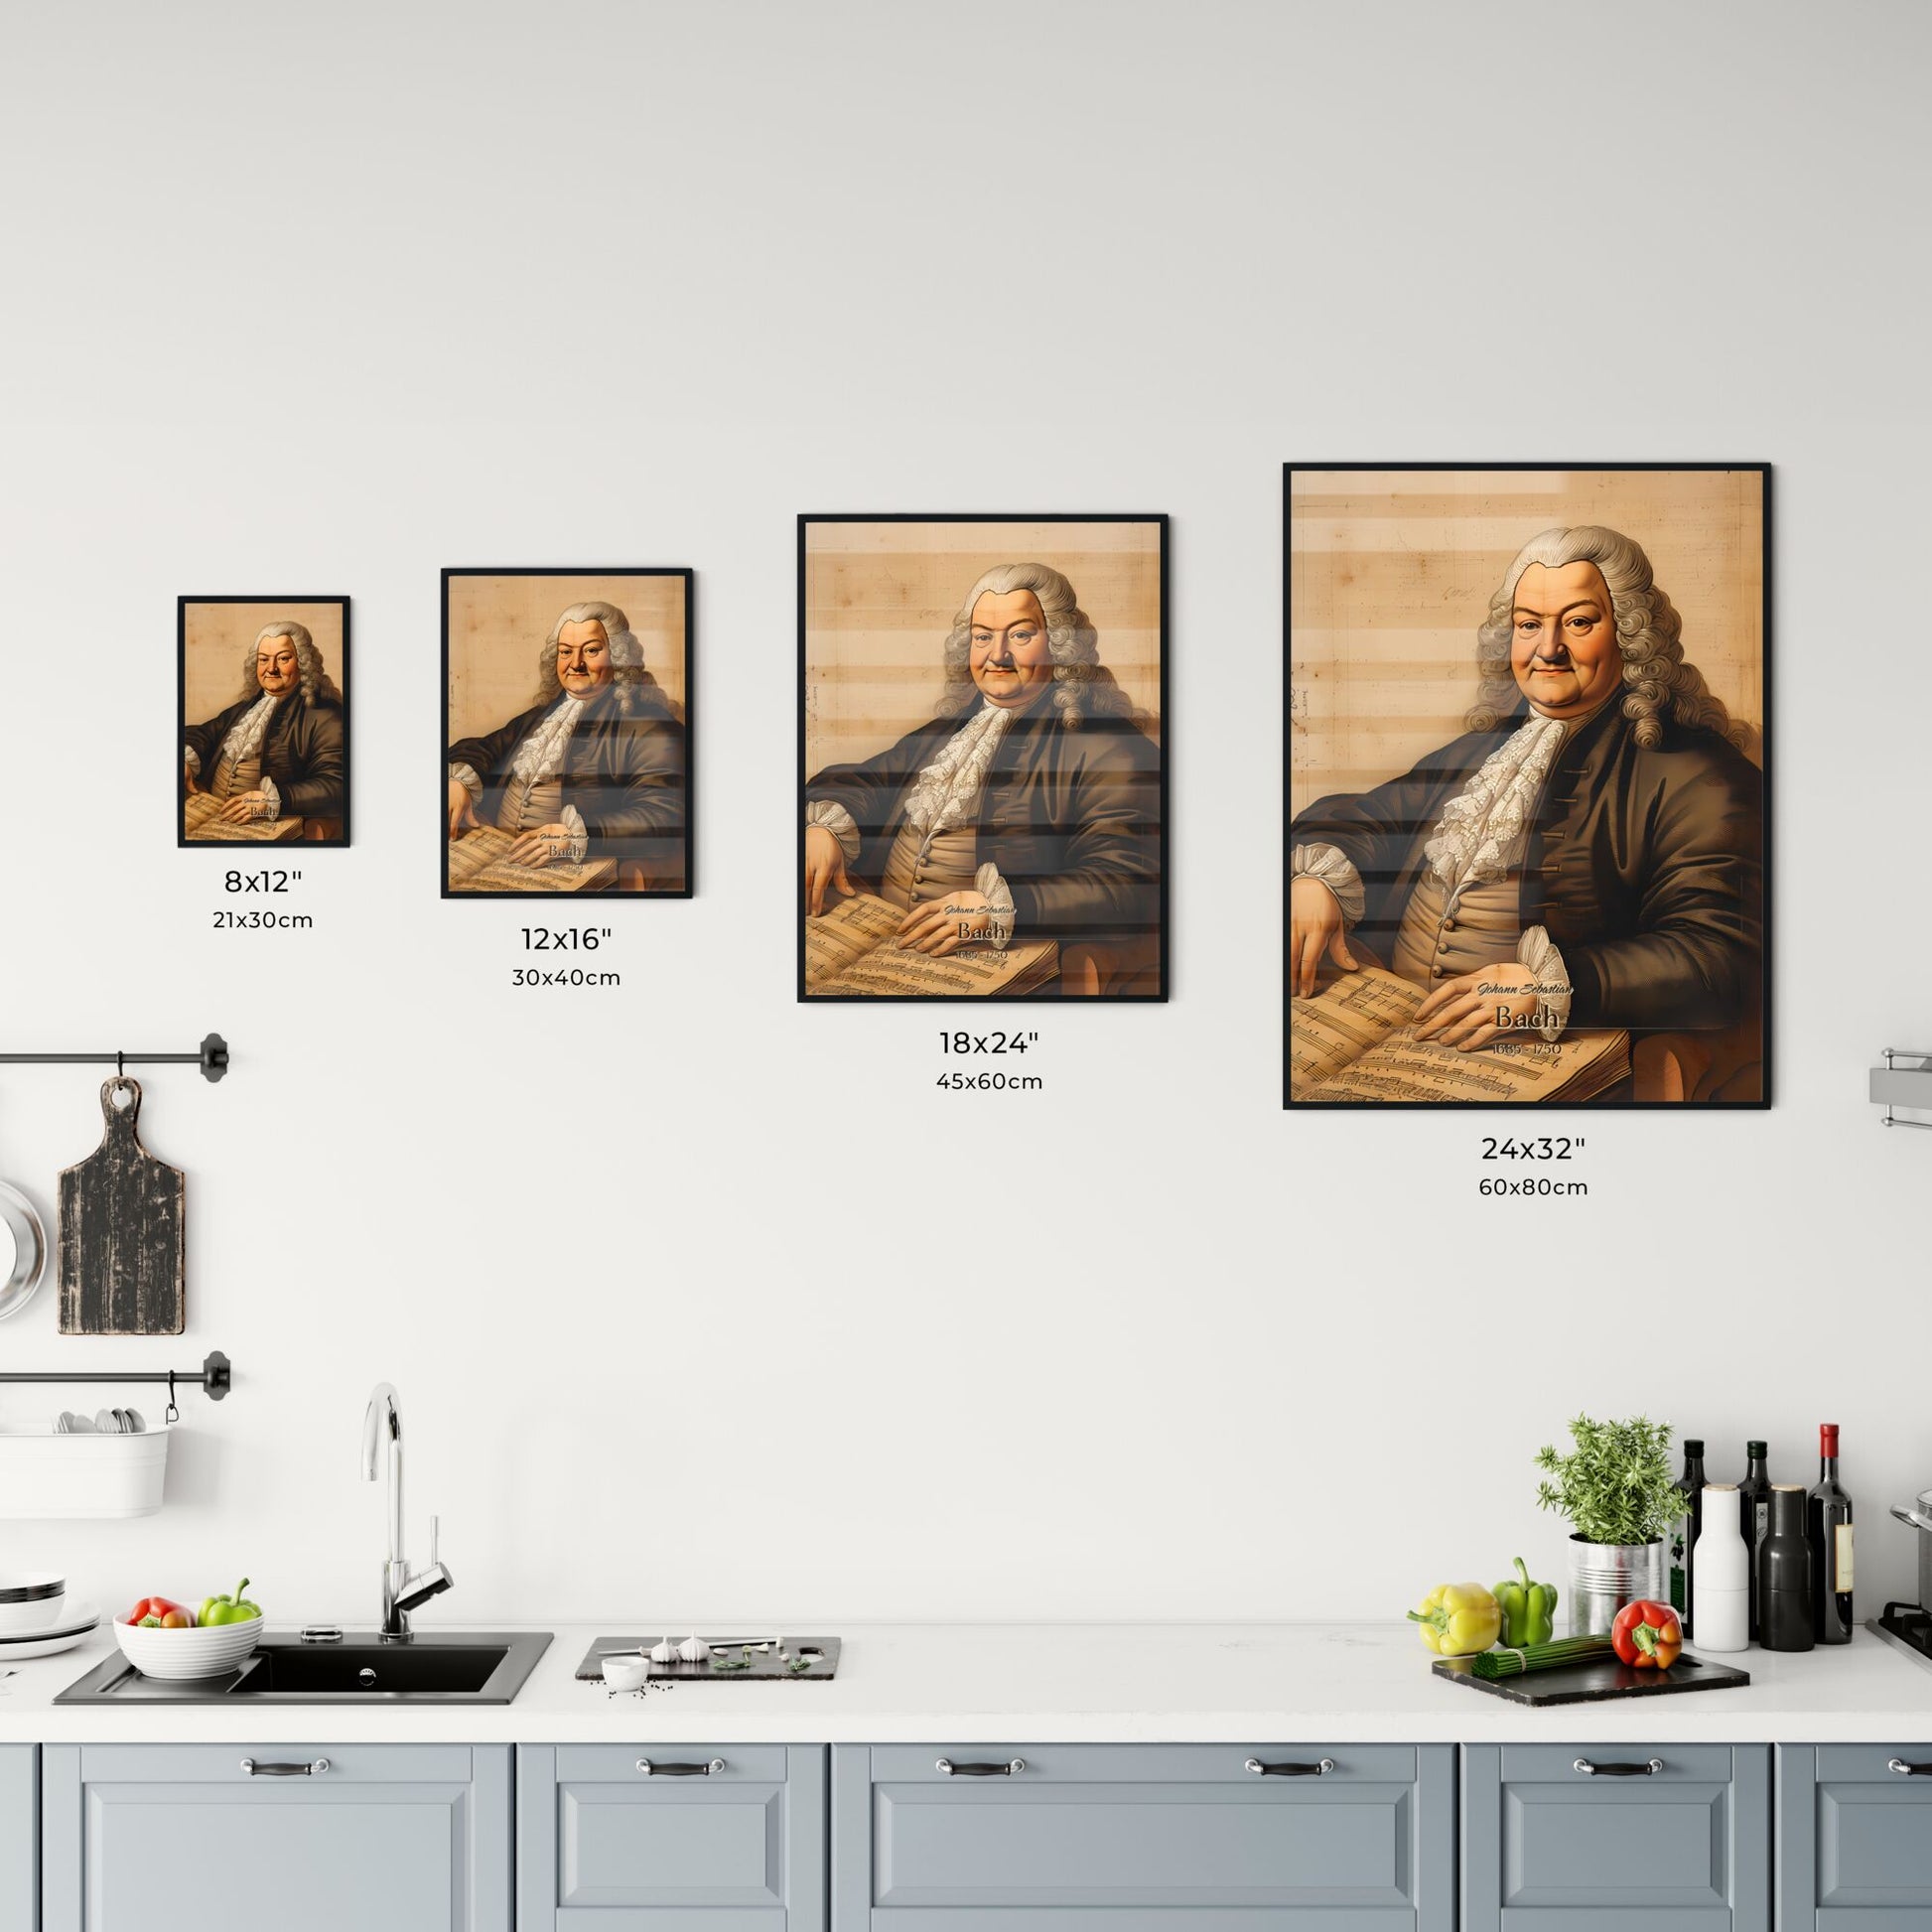 Johann Sebastian, Bach, 1685 - 1750, A Poster of a man with long white hair and a ruffled collar sitting at a table Default Title